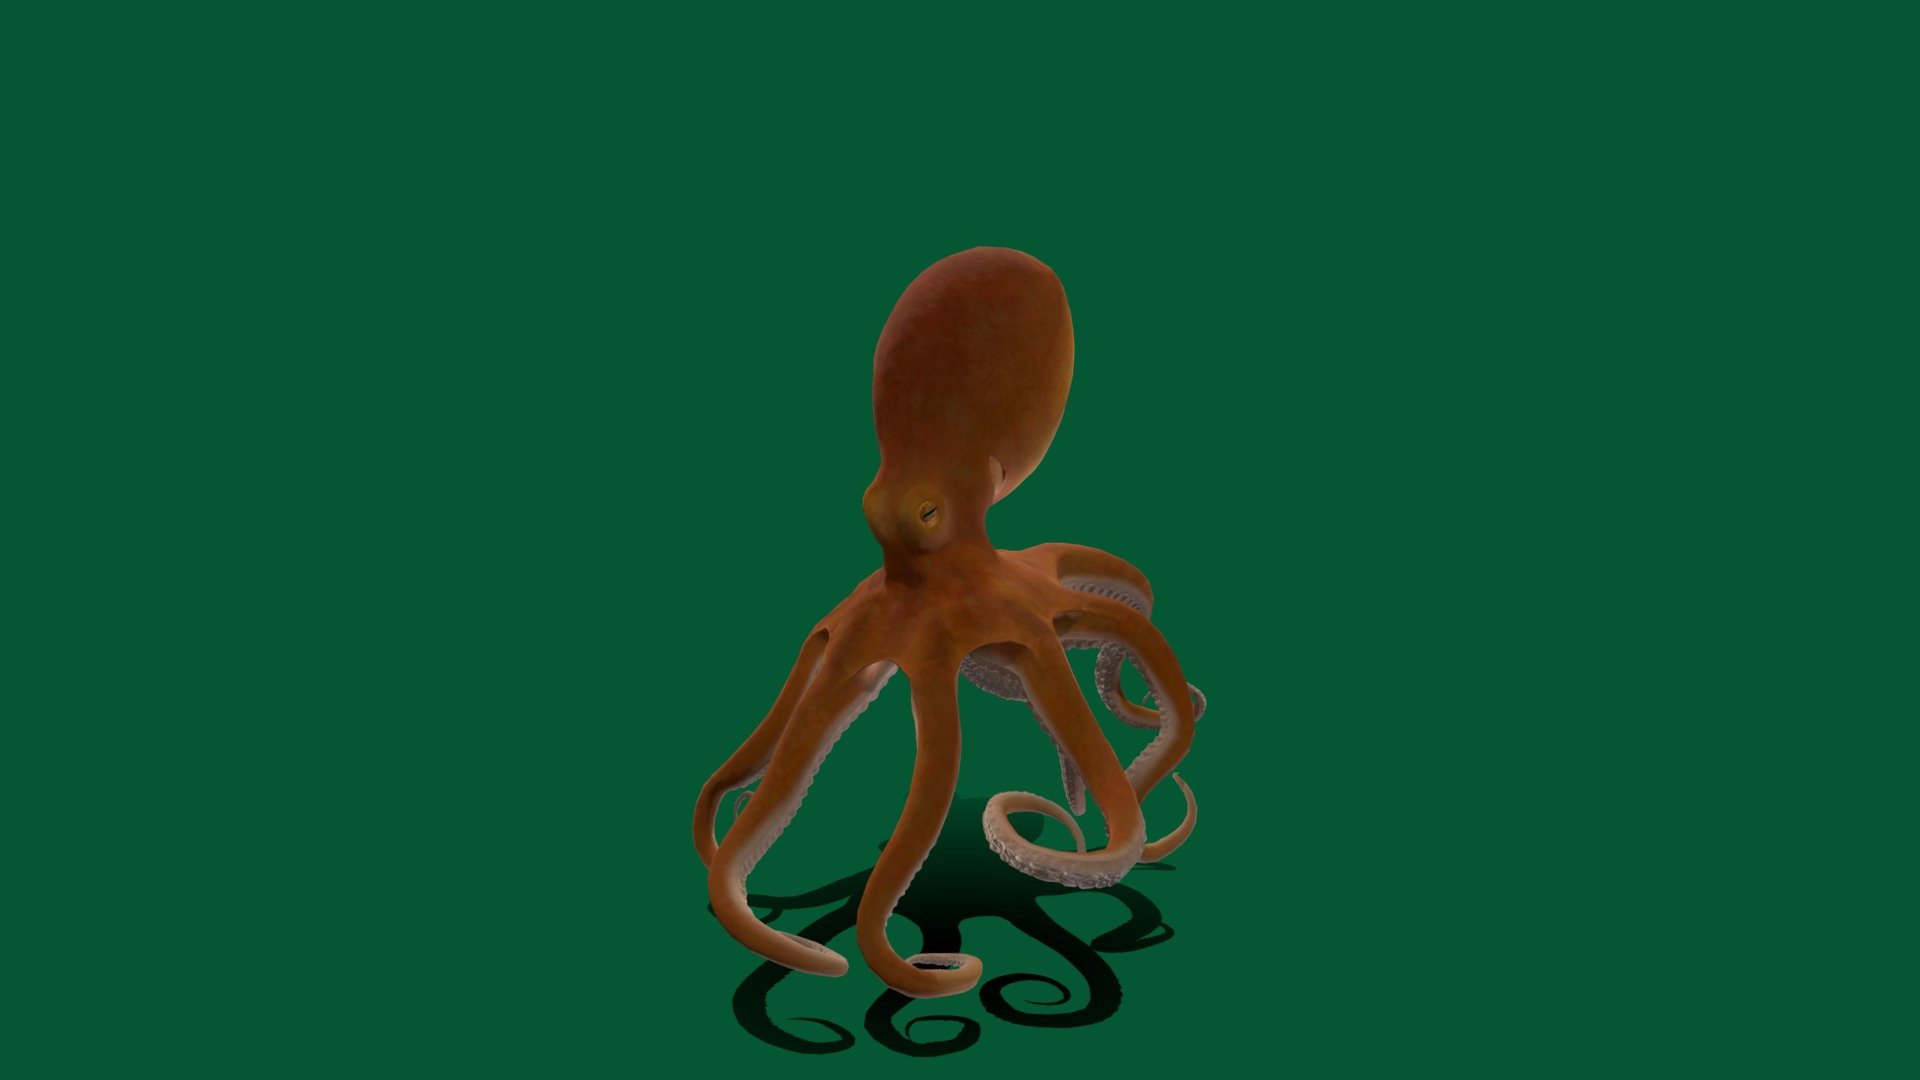 For Store Octopus
An octopus is a soft-bodied, eight-limbed mollusc of the order Octopoda. The order consists of some 300 species and is grouped within the class Cephalopoda with squids, cuttlefish, and nautiloids - Octopus - 3D model by Beautiful Animals (nyilonelycompany + theappgod) (@beautifulanimals) 3d model